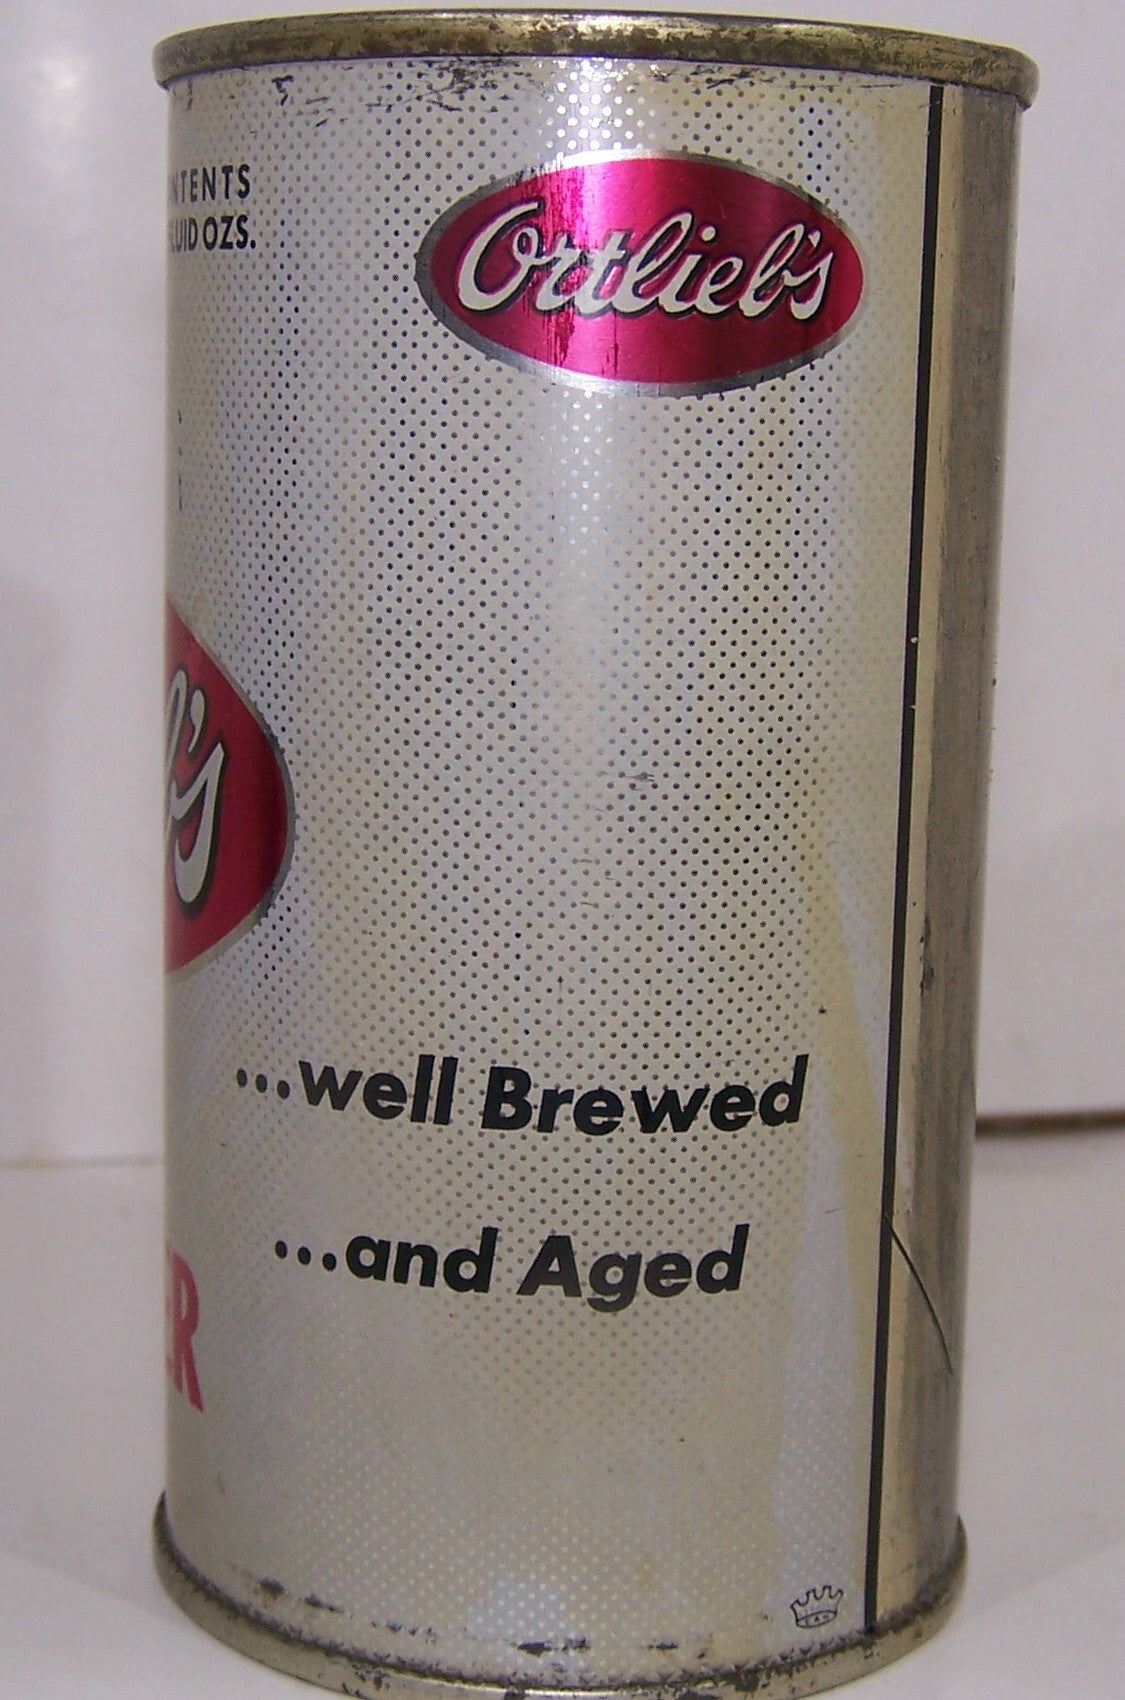 Ortlieb's Premium Lager Beer, (Pink Hops) USBC 109-21, Grade 1- Sold on 09/16/16